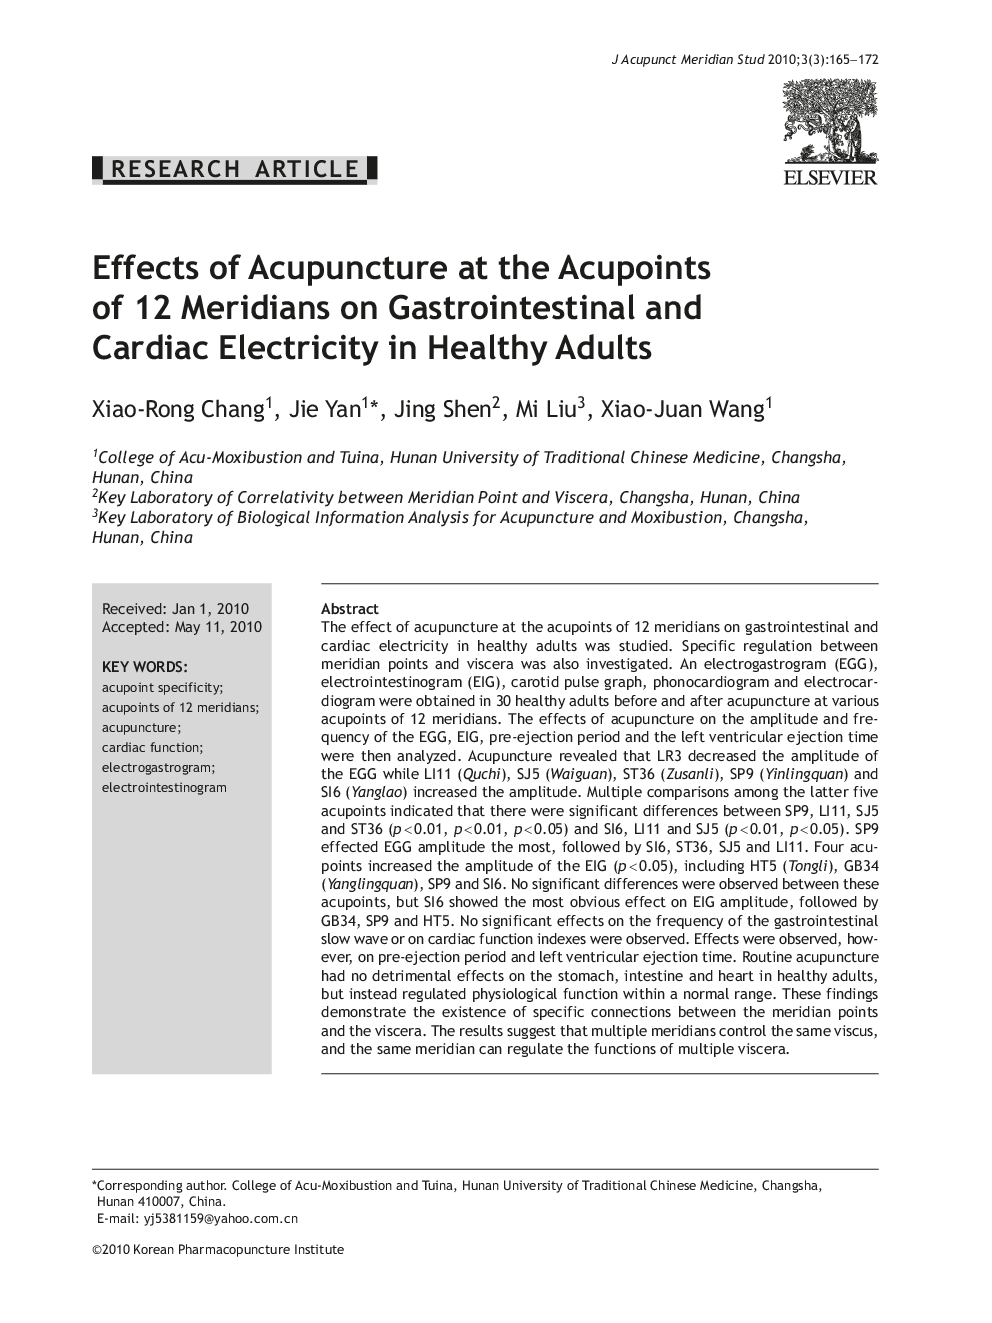 Effects of Acupuncture at the Acupoints of 12 Meridians on Gastrointestinal and Cardiac Electricity in Healthy Adults